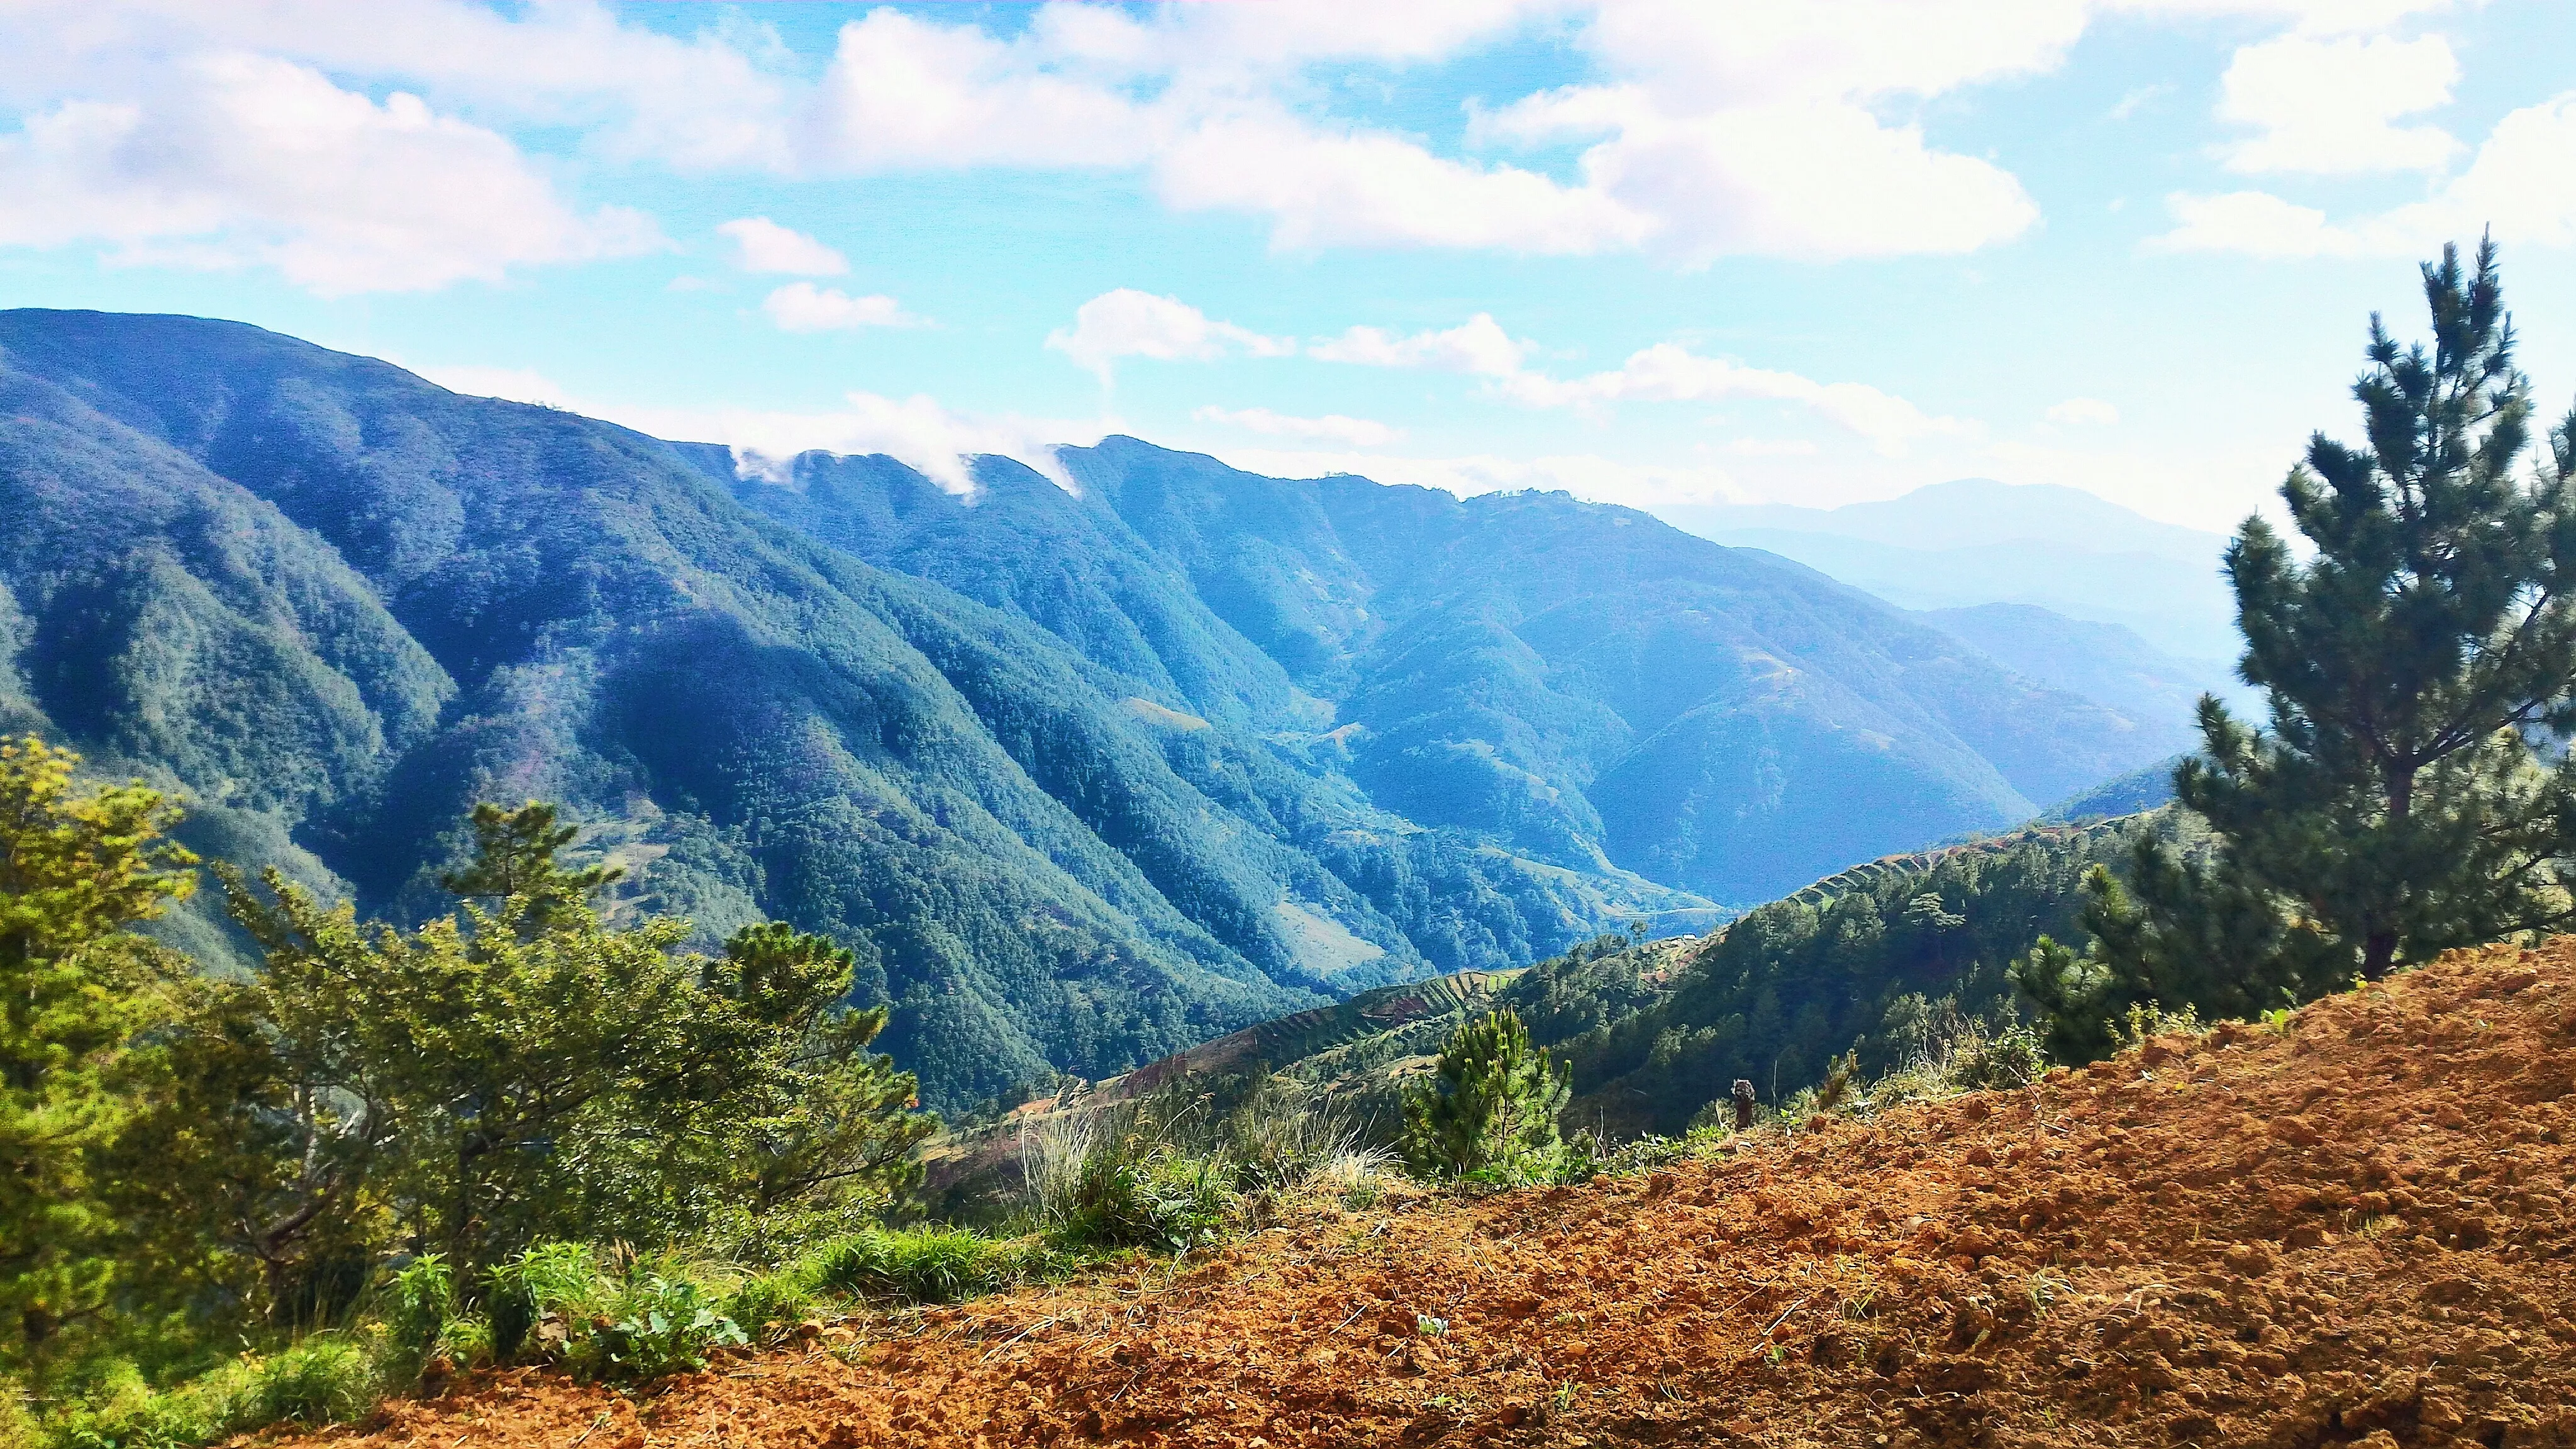 Mount Pulag in Philippines, Central Asia | Trekking & Hiking - Rated 3.7